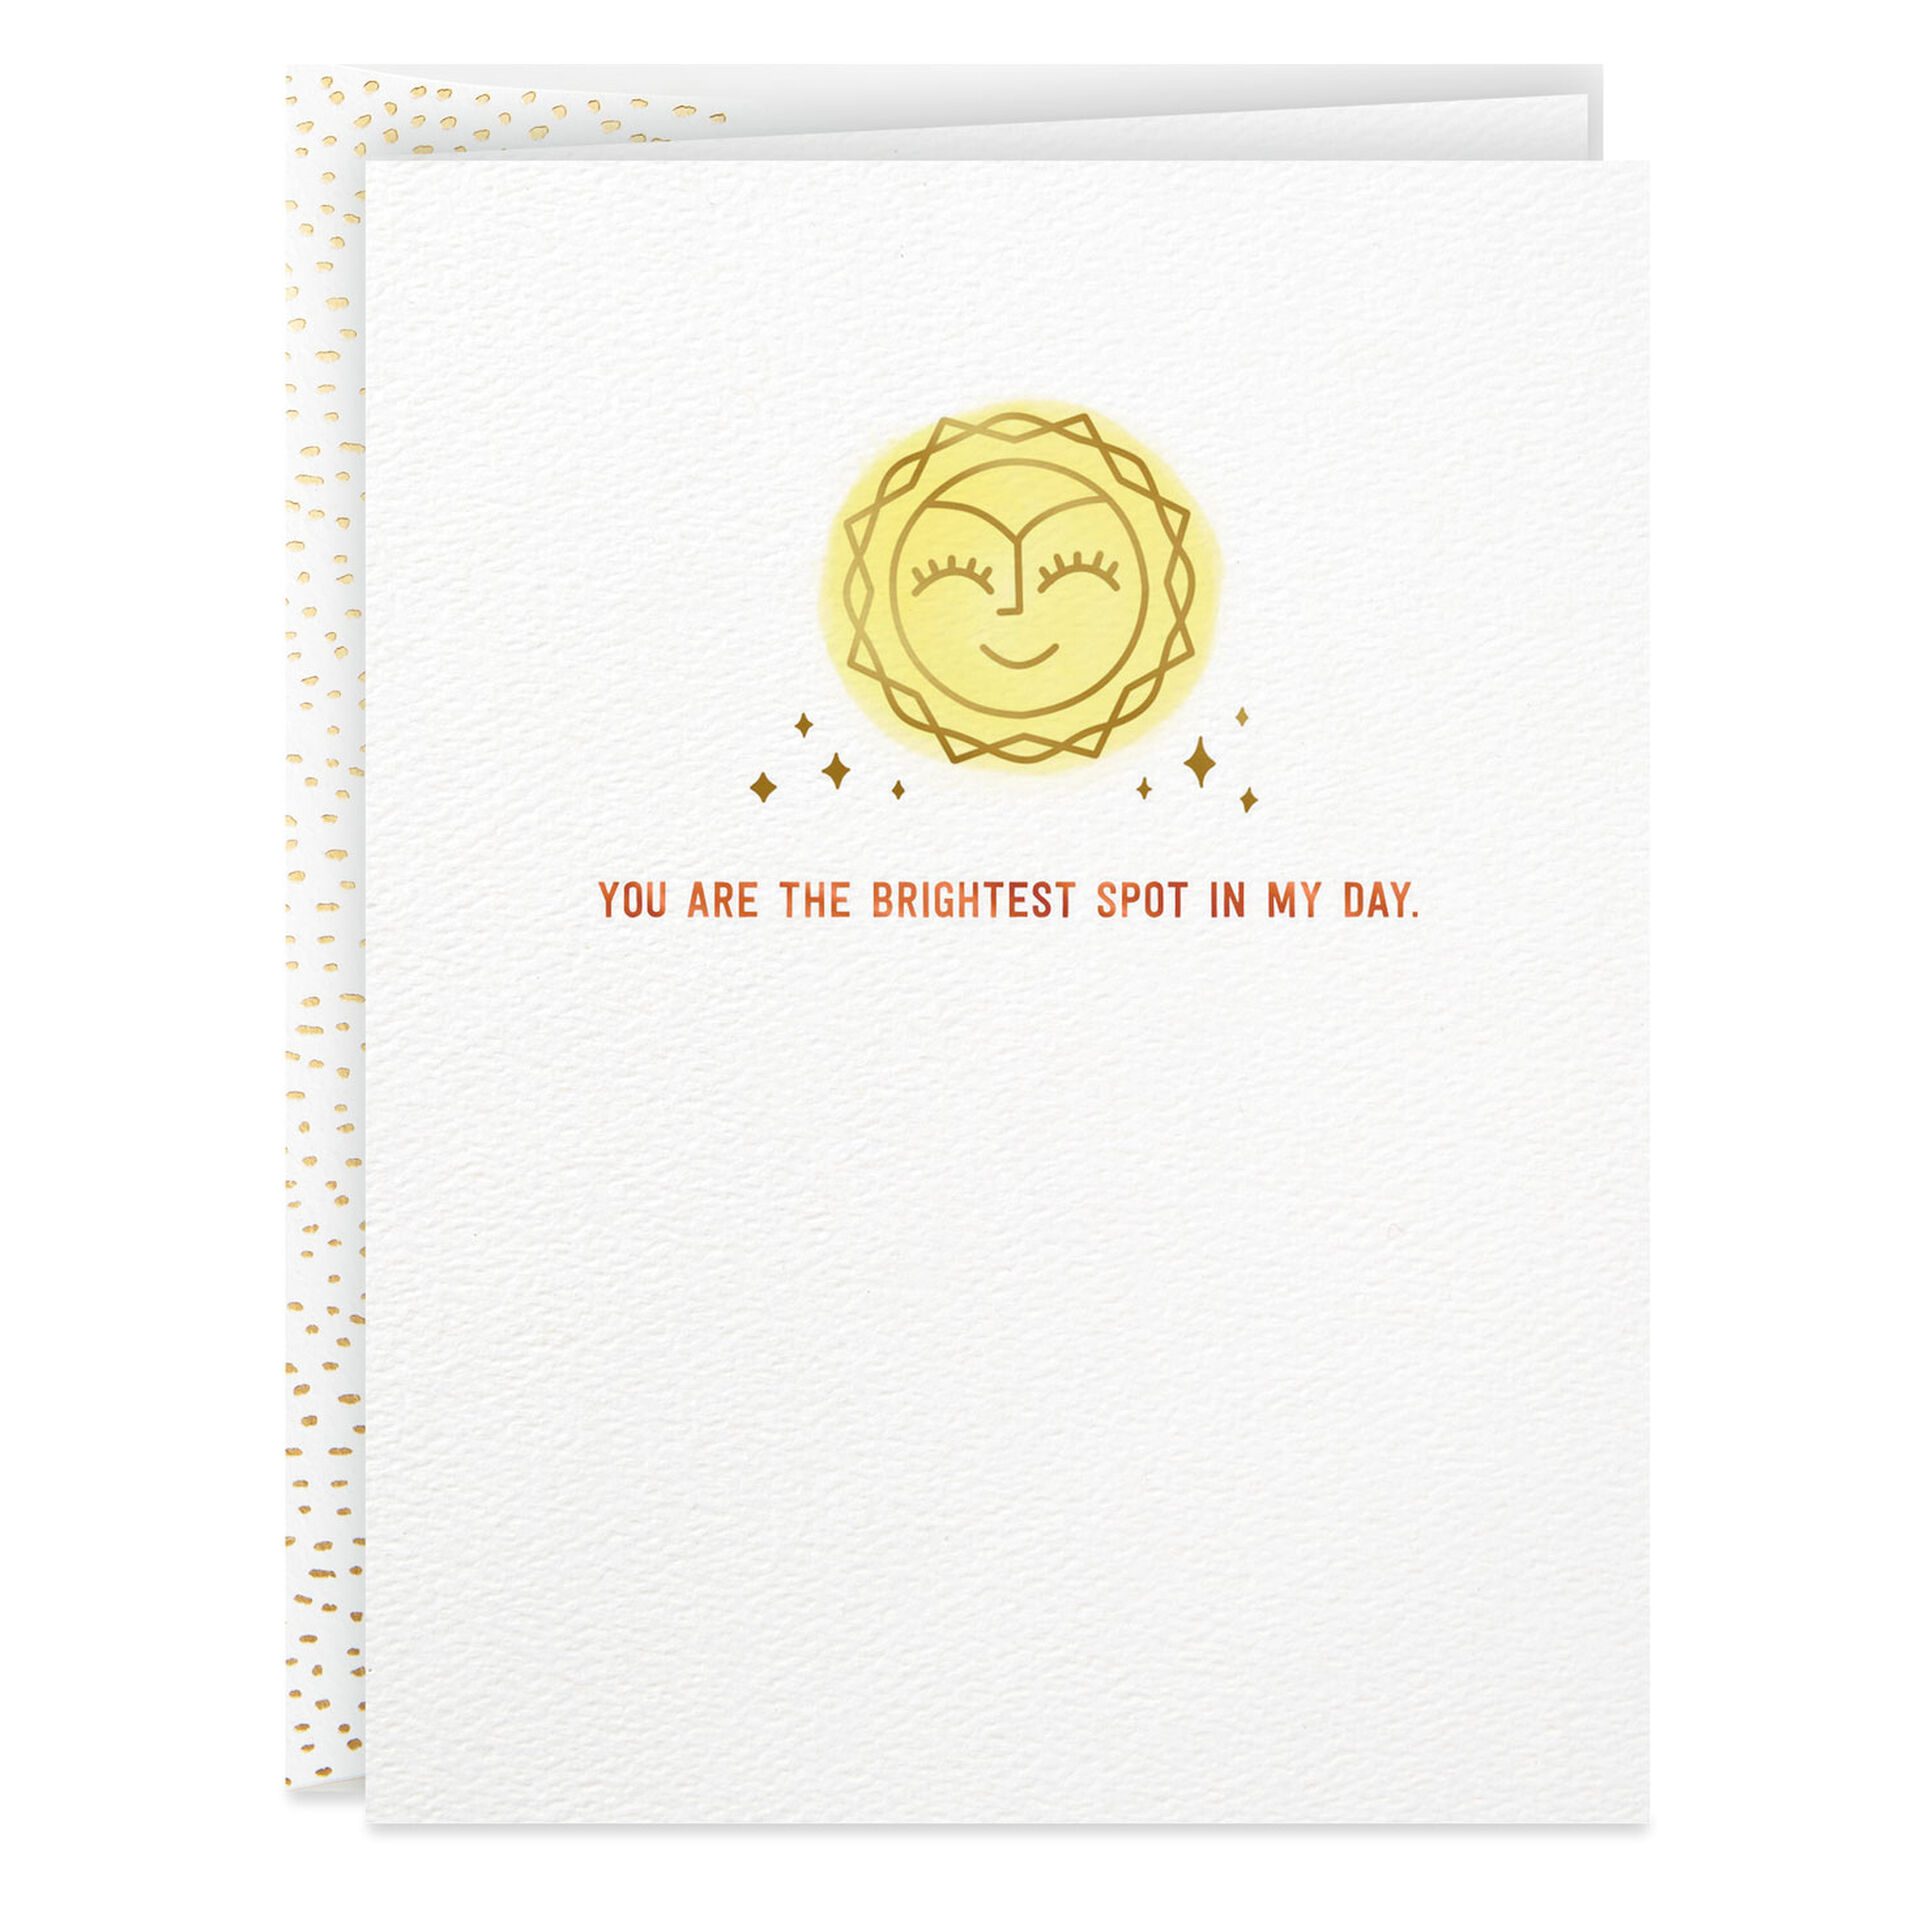 Smiling-Sun-Thinking-of-You-Card_499HRD3004_01